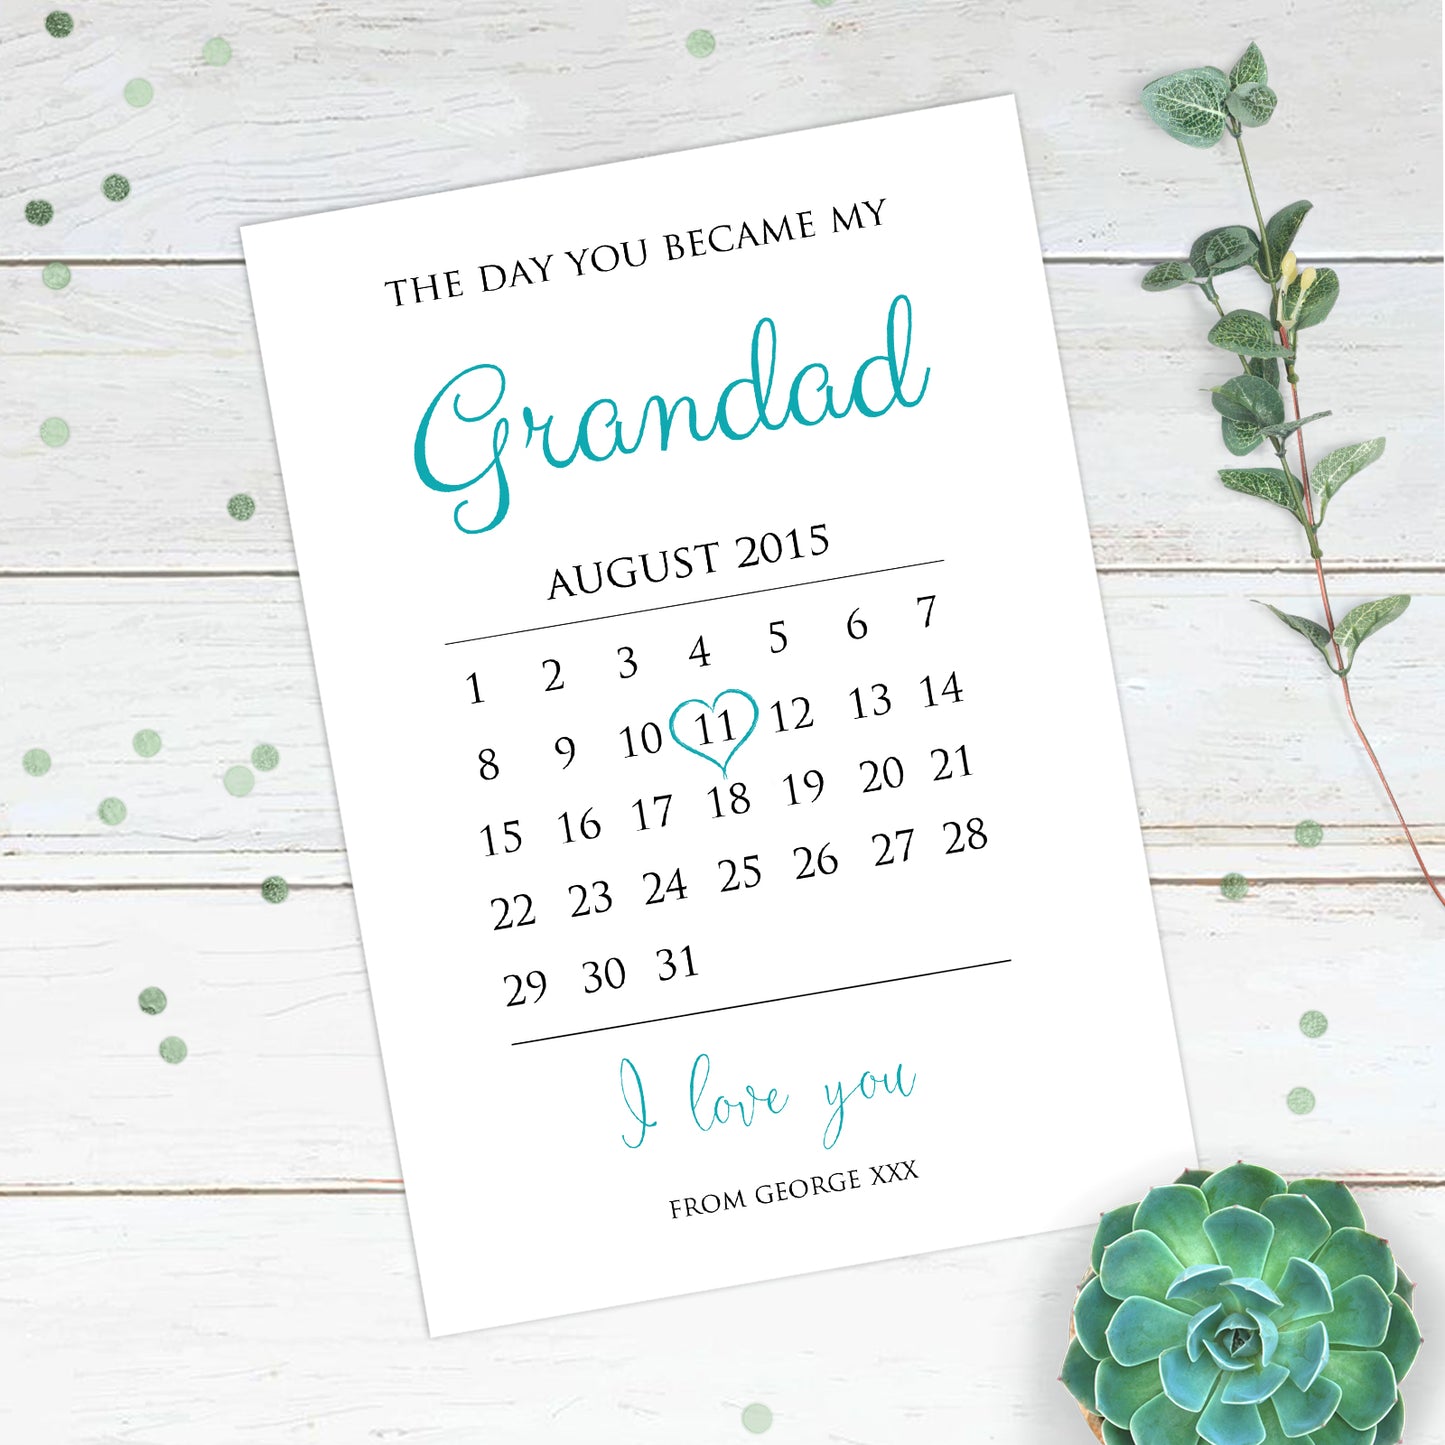 Personalised The Day You Became My Dad Calendar Print